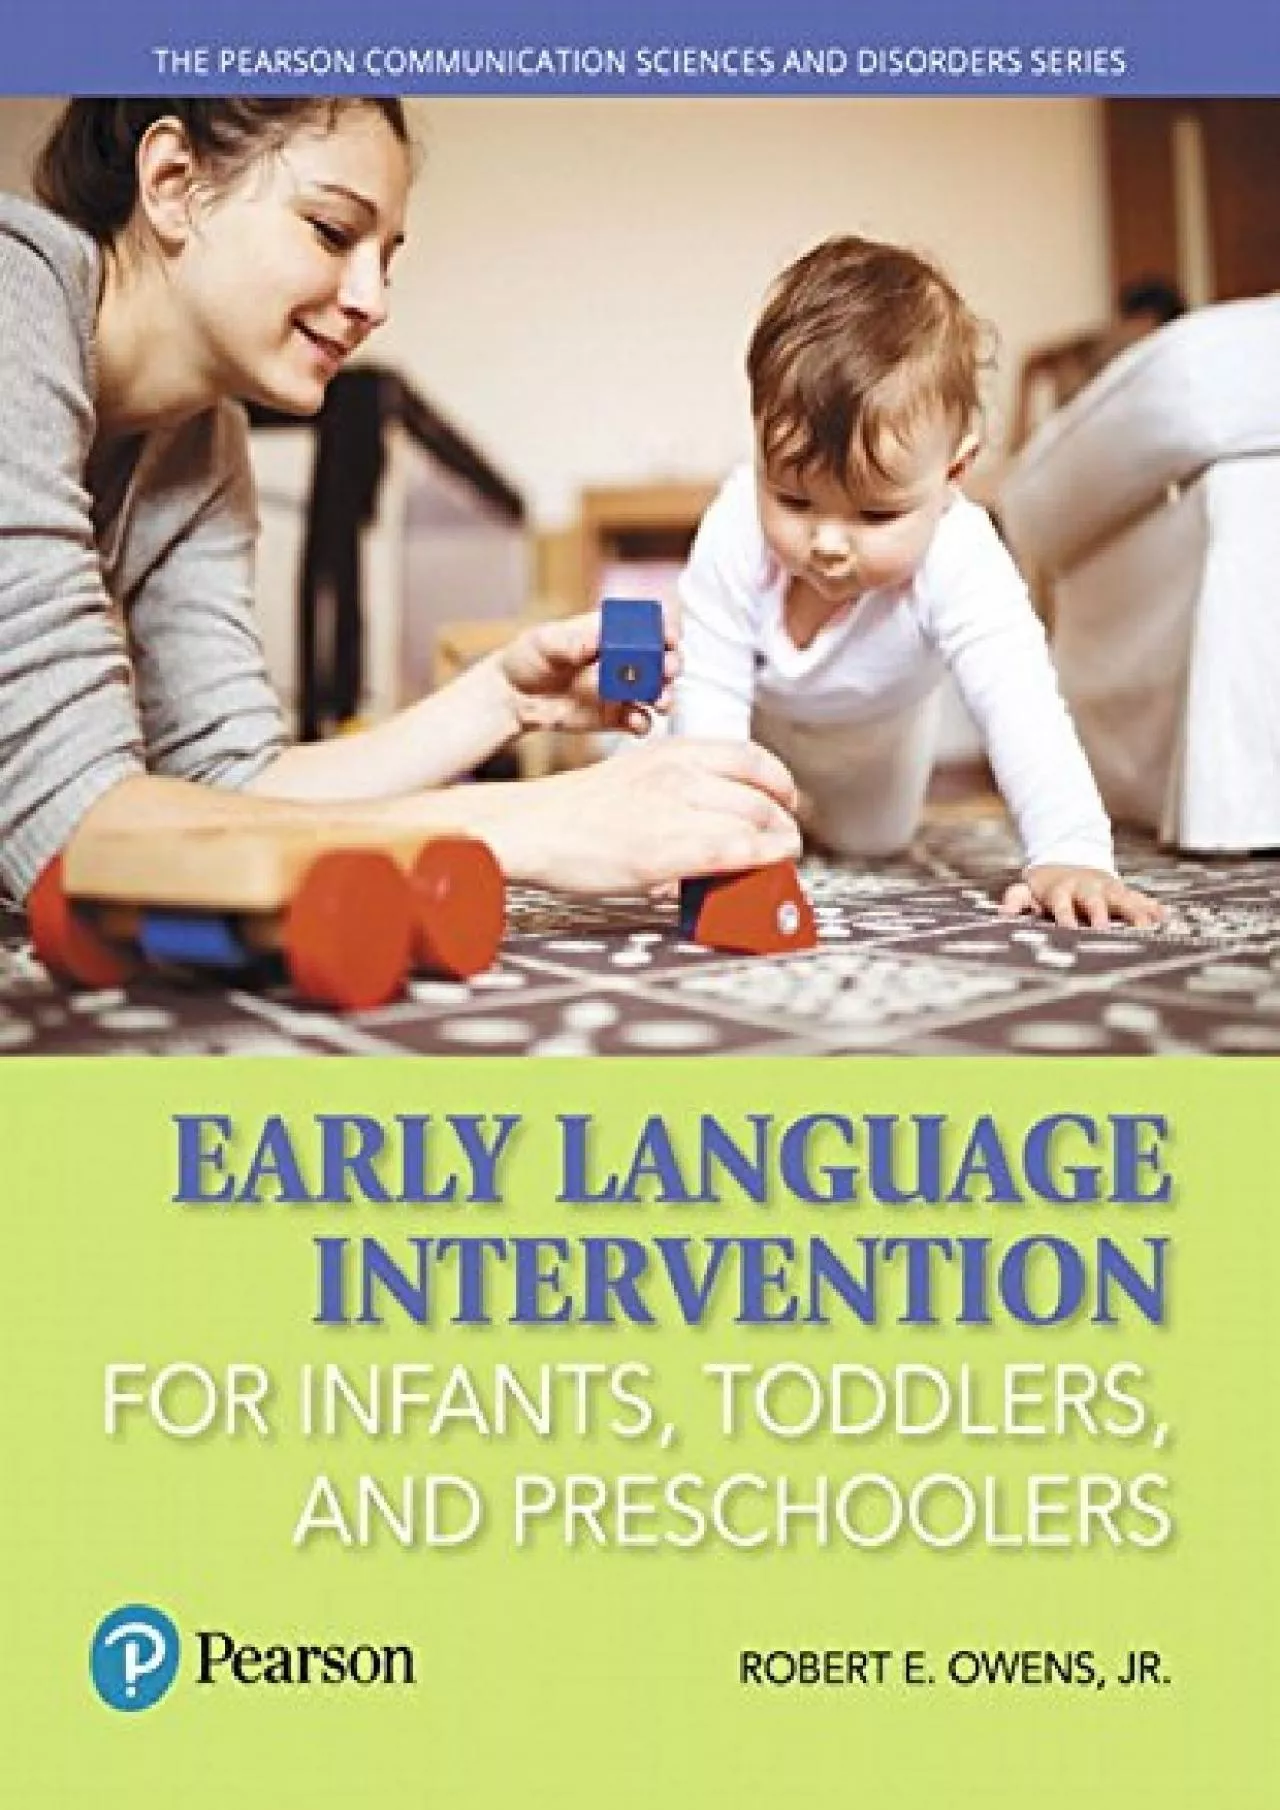 (EBOOK)-Early Language Intervention for Infants, Toddlers, and Preschoolers (Pearson Communication